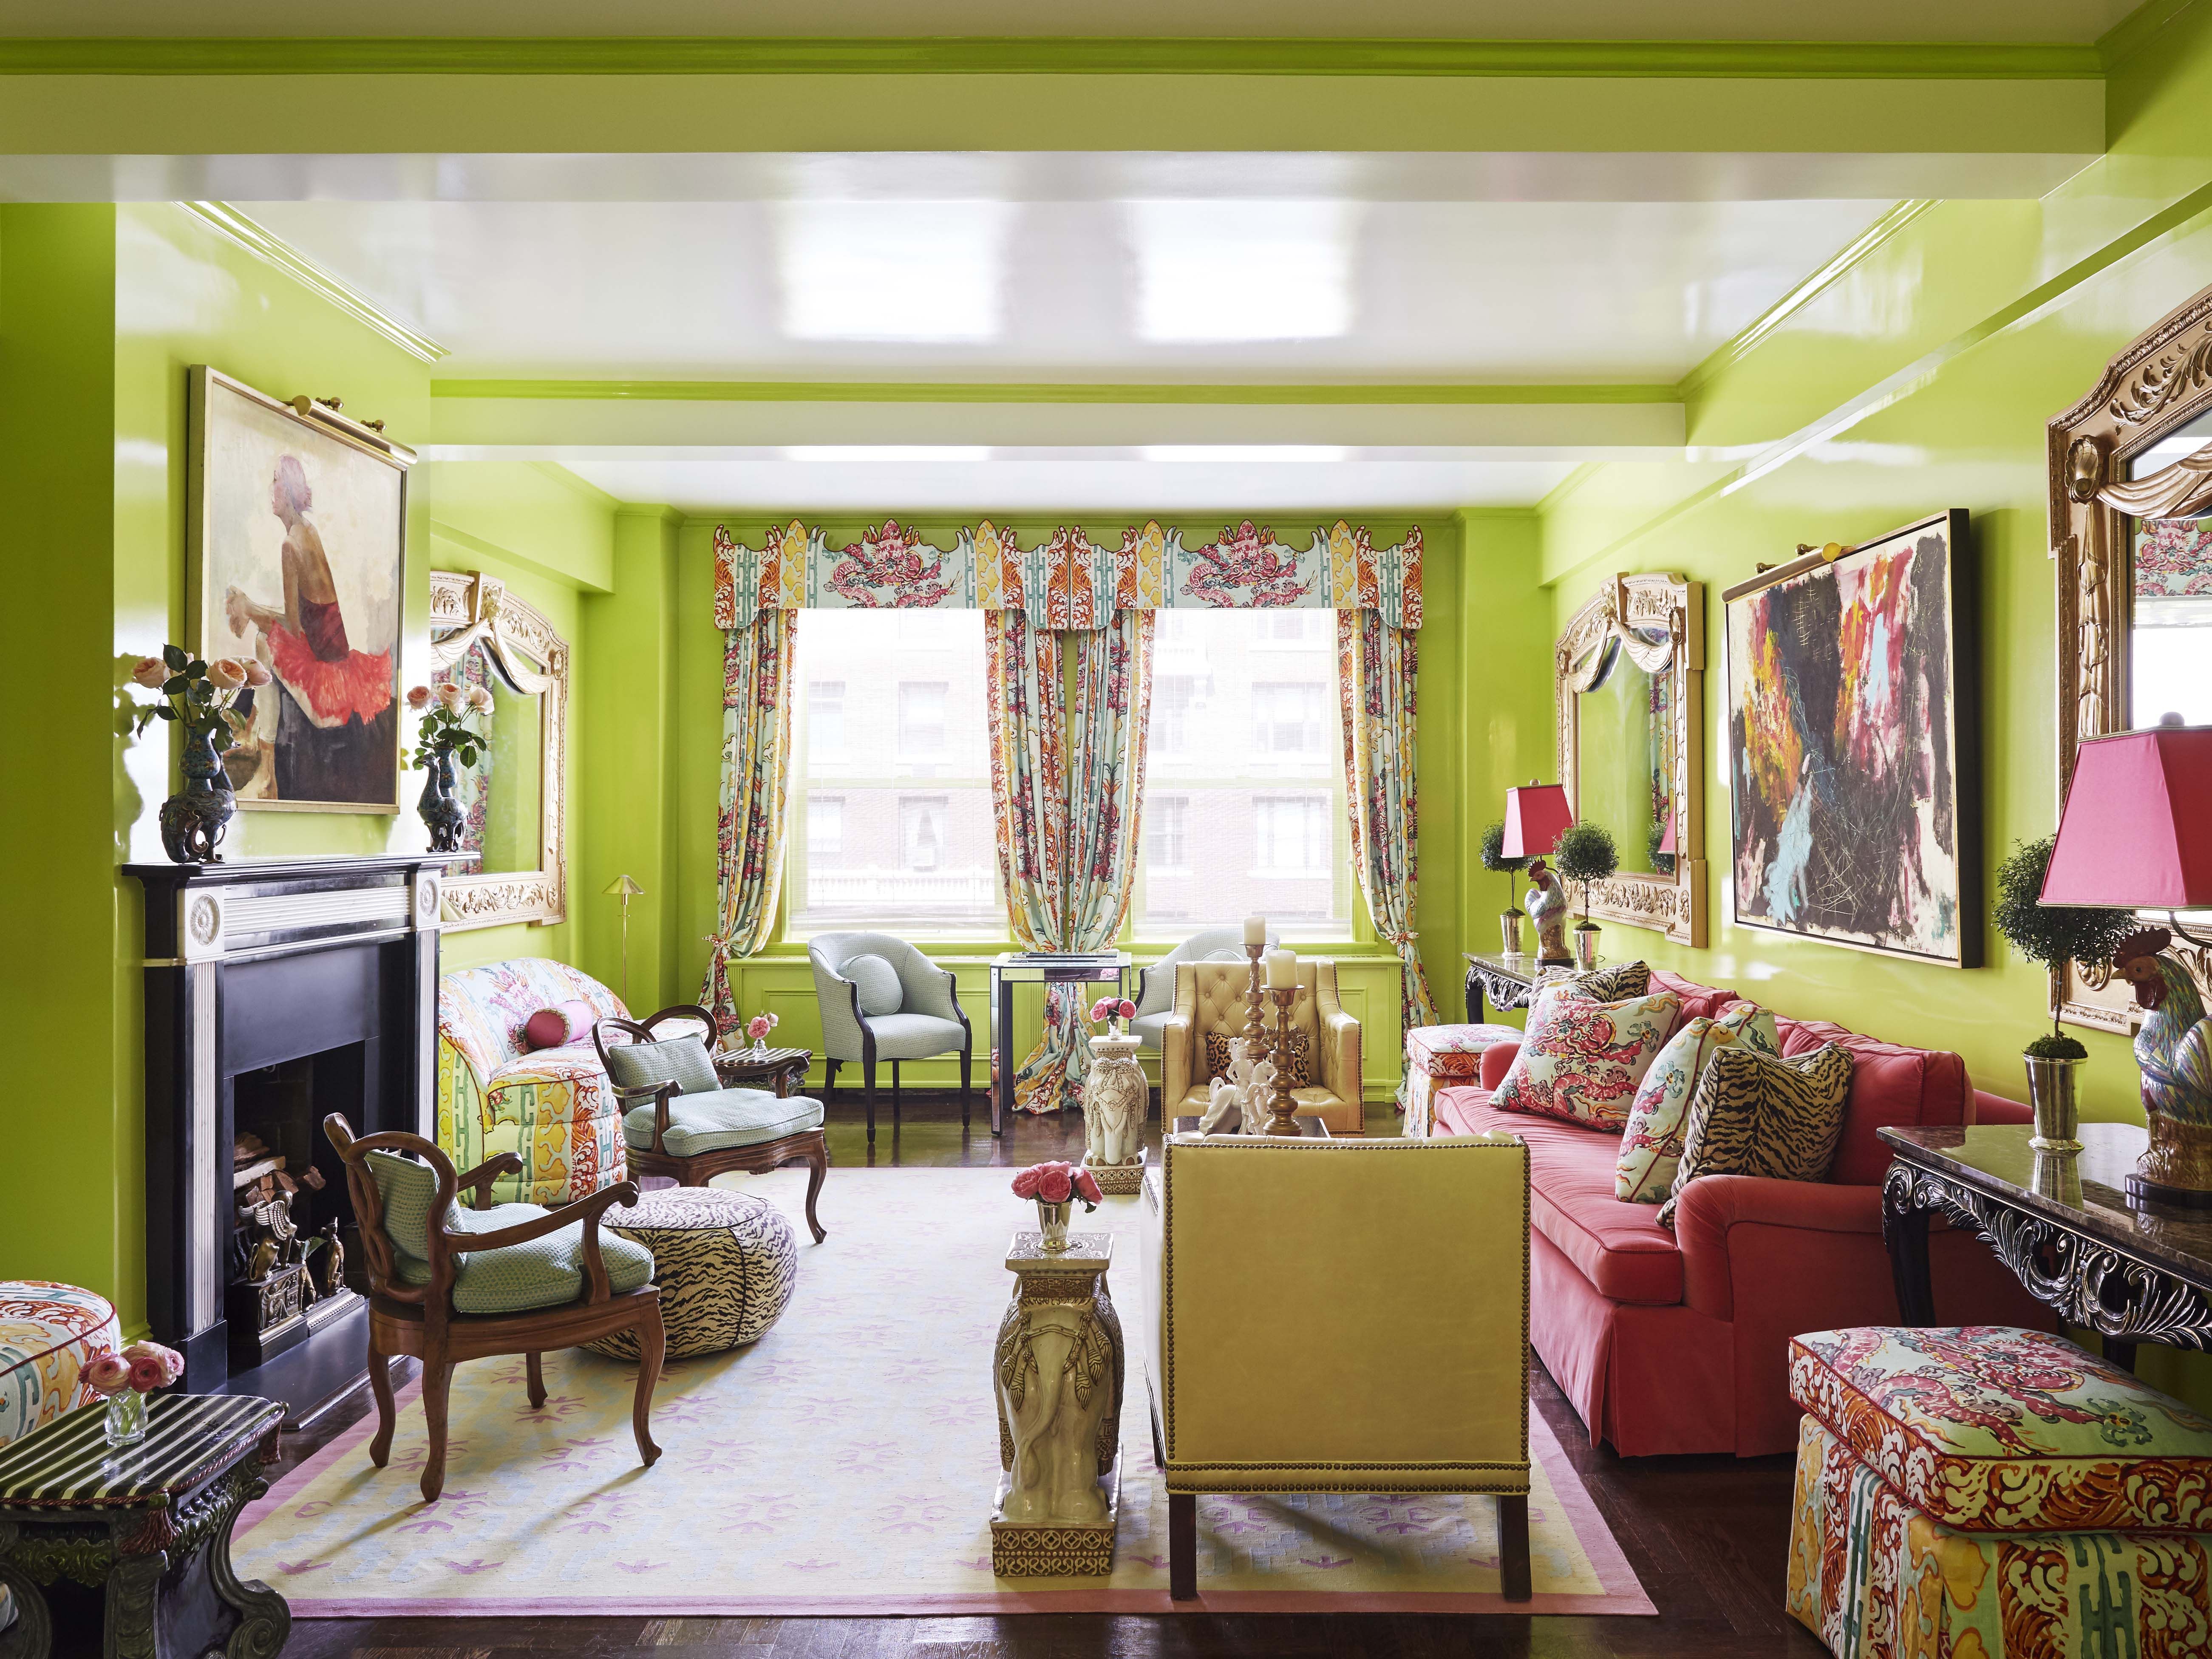 The Best Living Room Paint Colors of 18, According to Designers